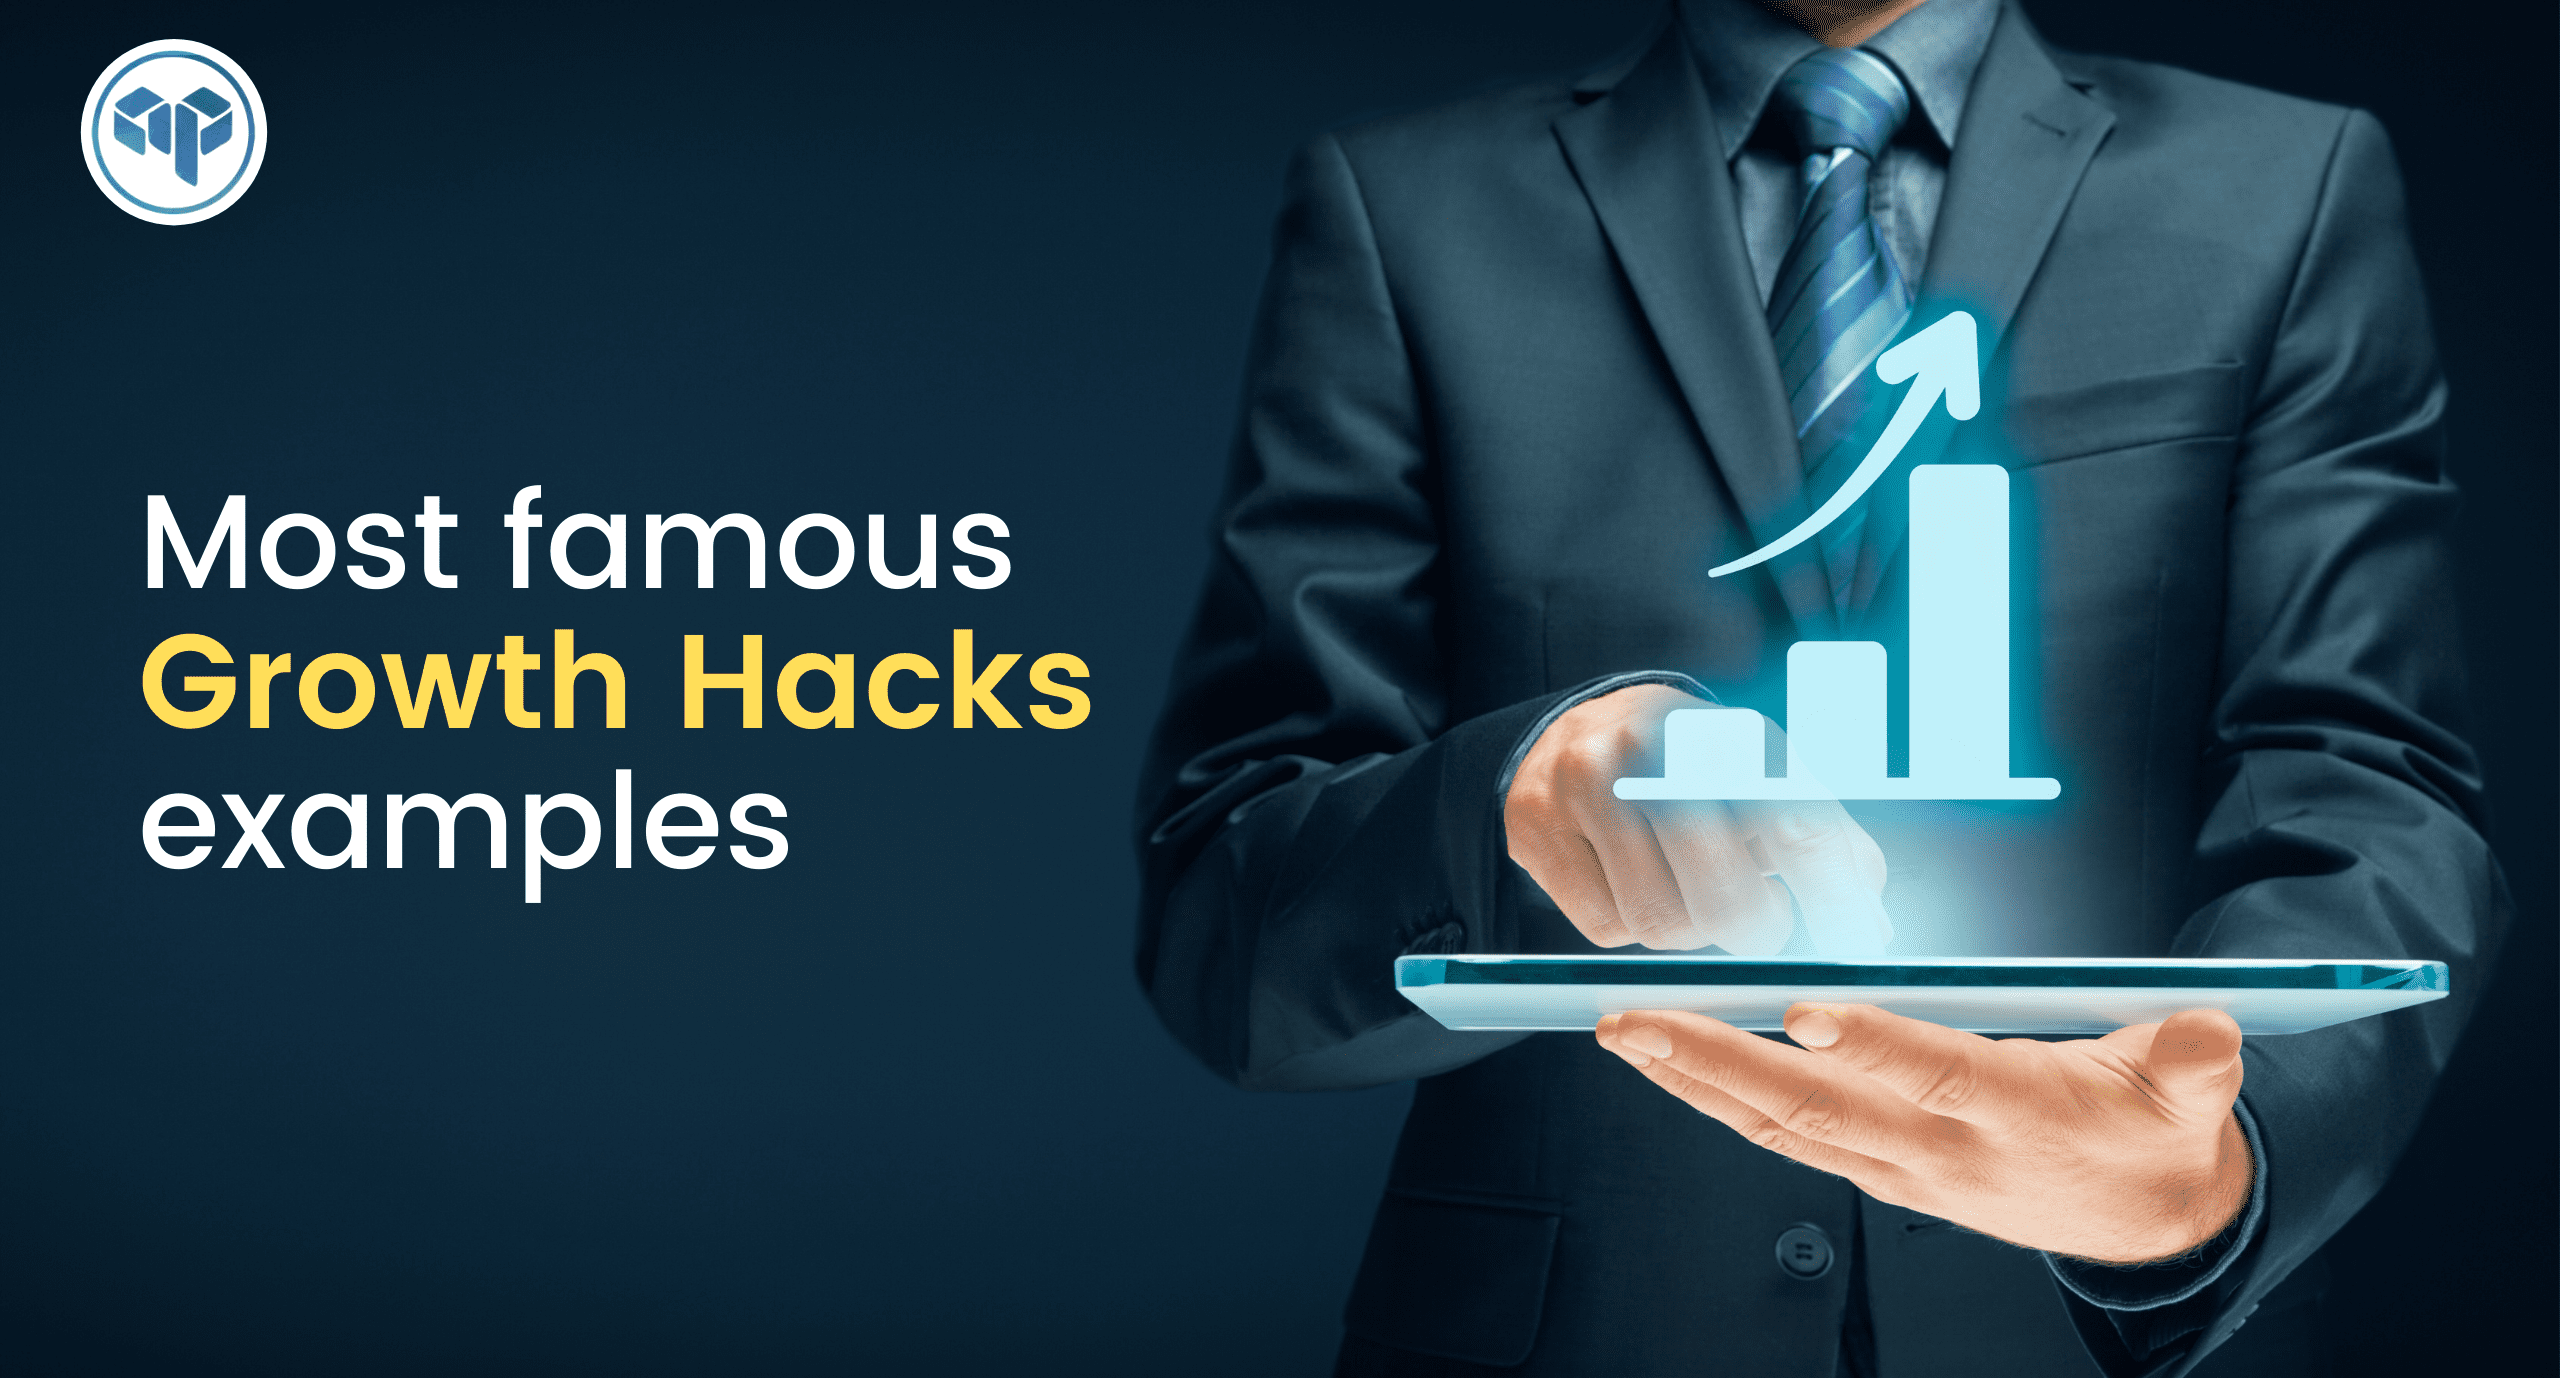 Most famous growth hacks examples